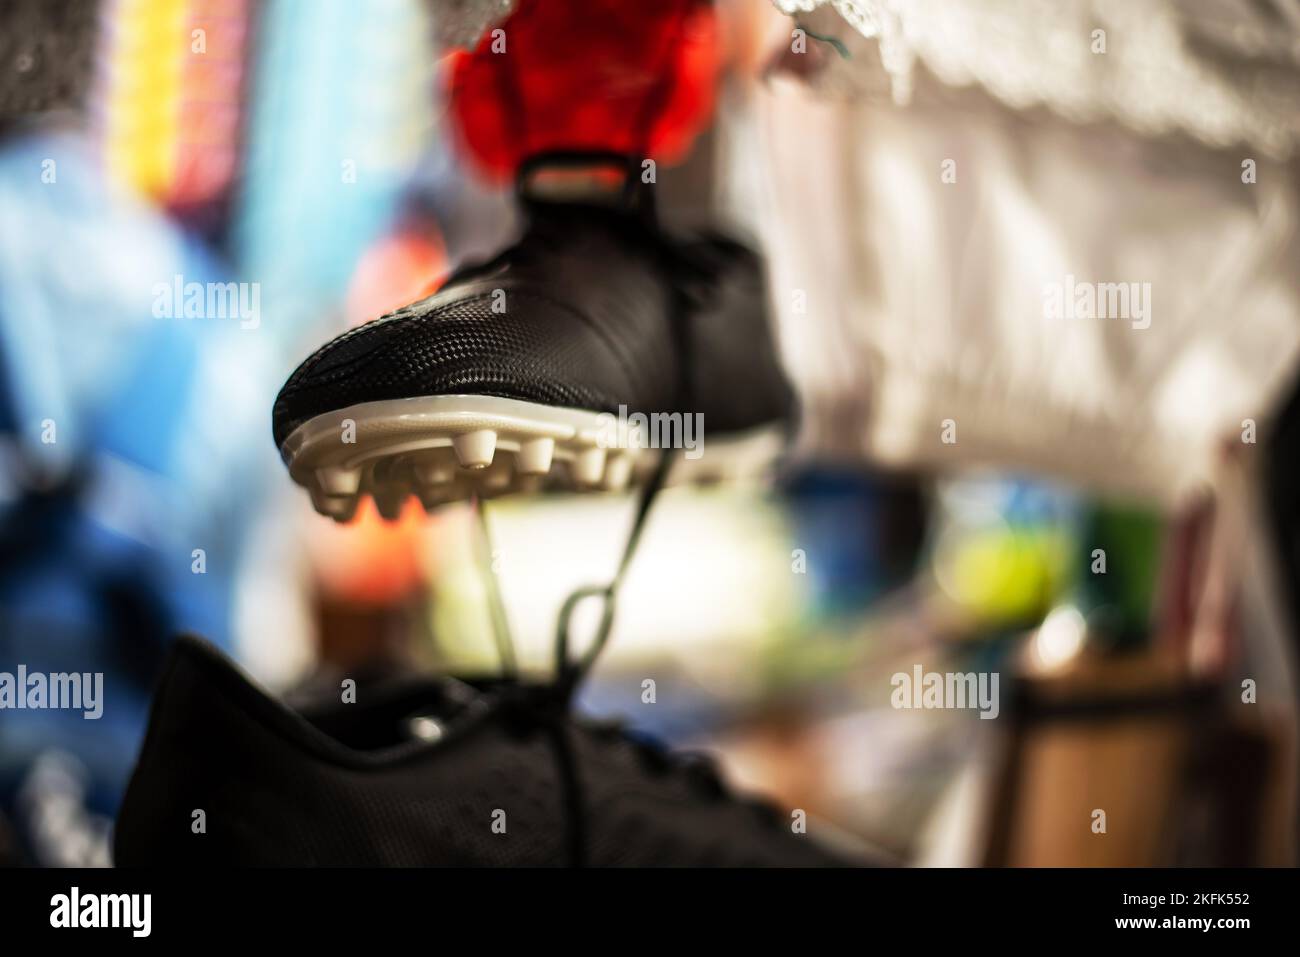 Soccer Cleats are hanging intron of a retail store Stock Photo